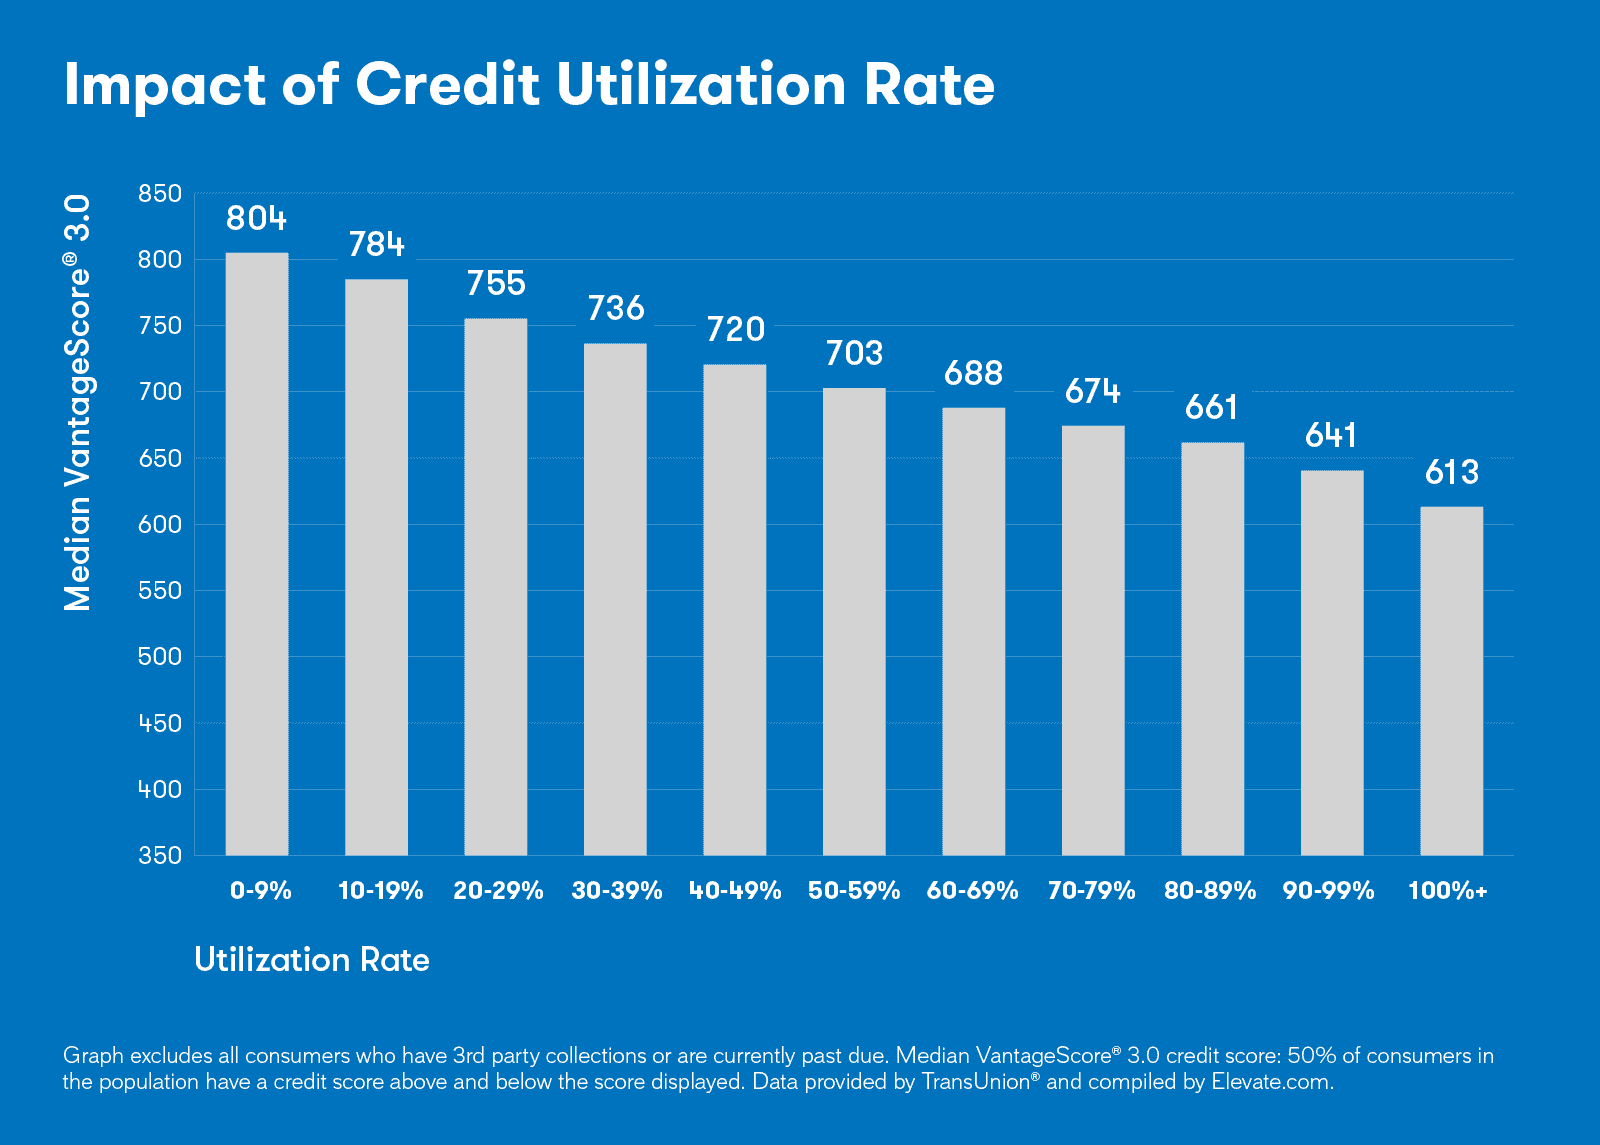 Chart showing the impact that your credit utilization rate has on your credit score.